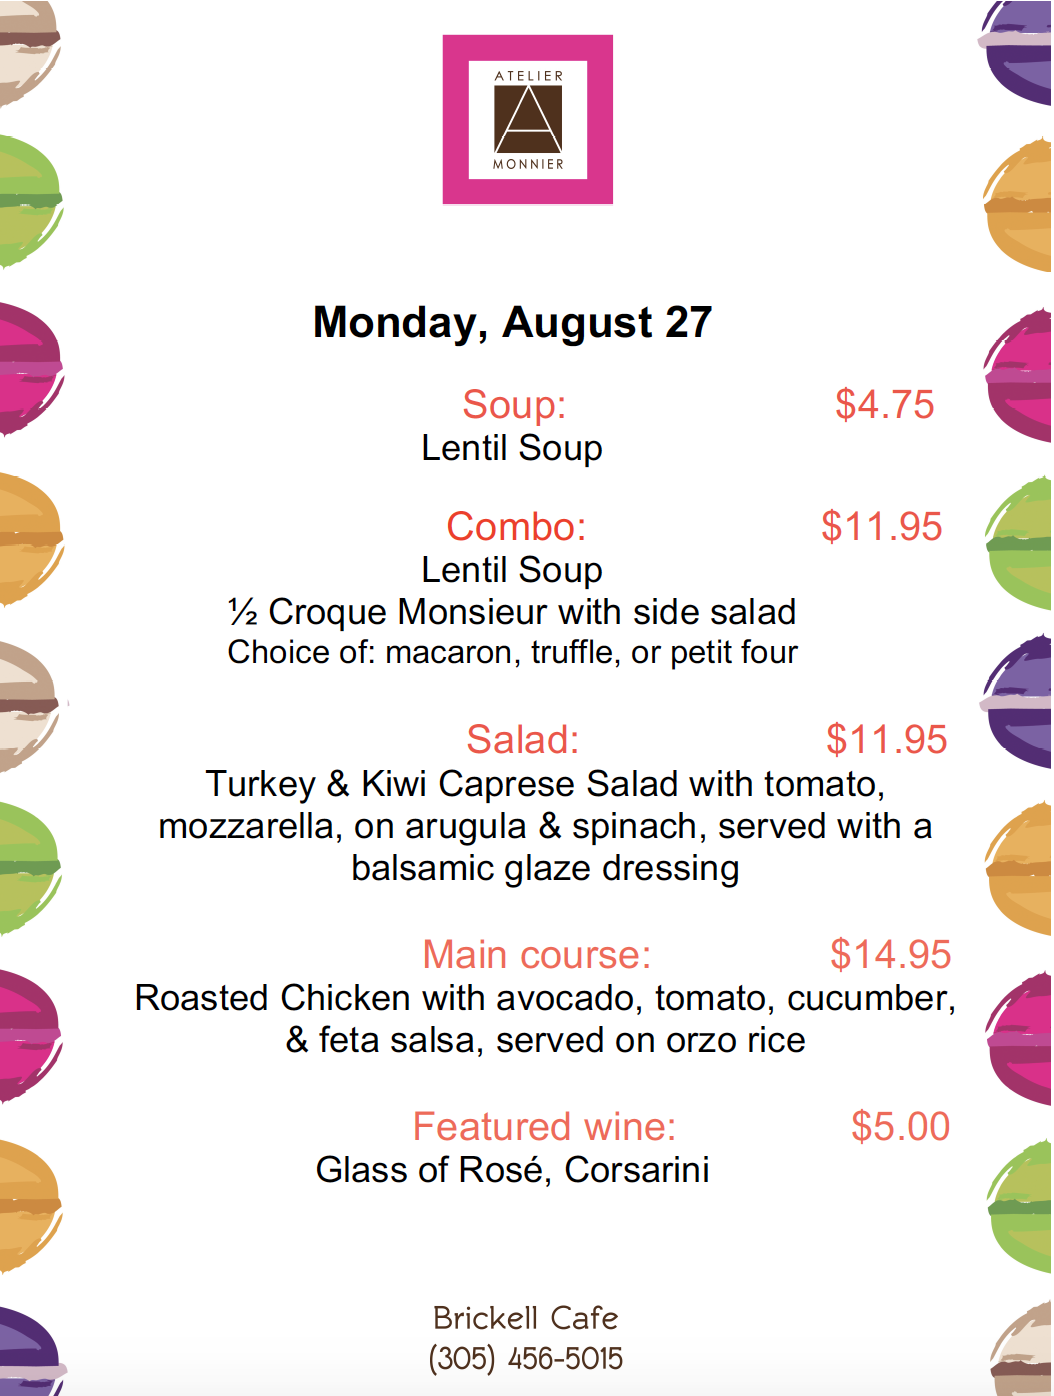 Atelier Monnier Brickell- Lunch Specials of the Week